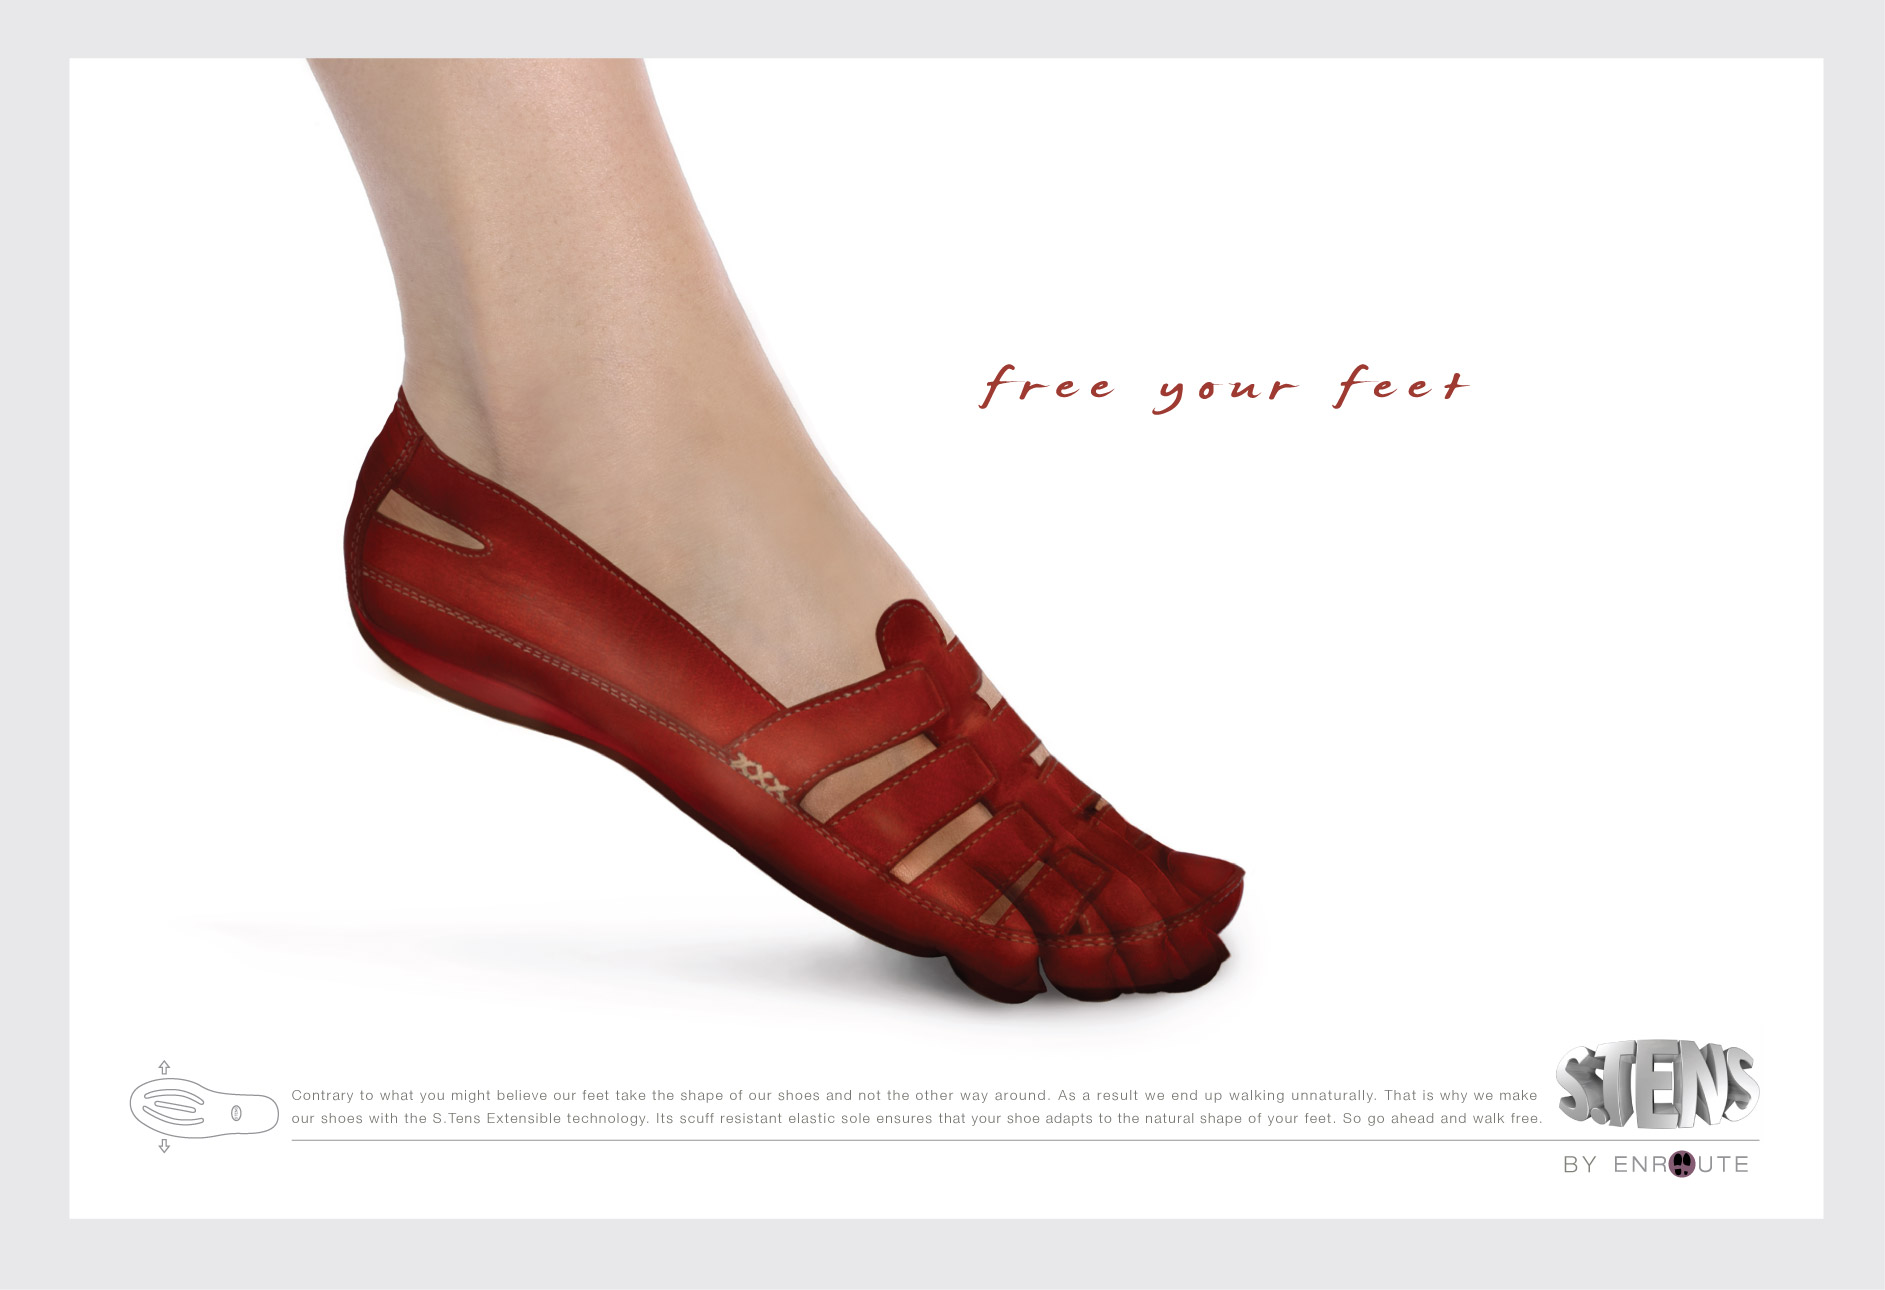 Print campaign for Stens: Enroute shoes